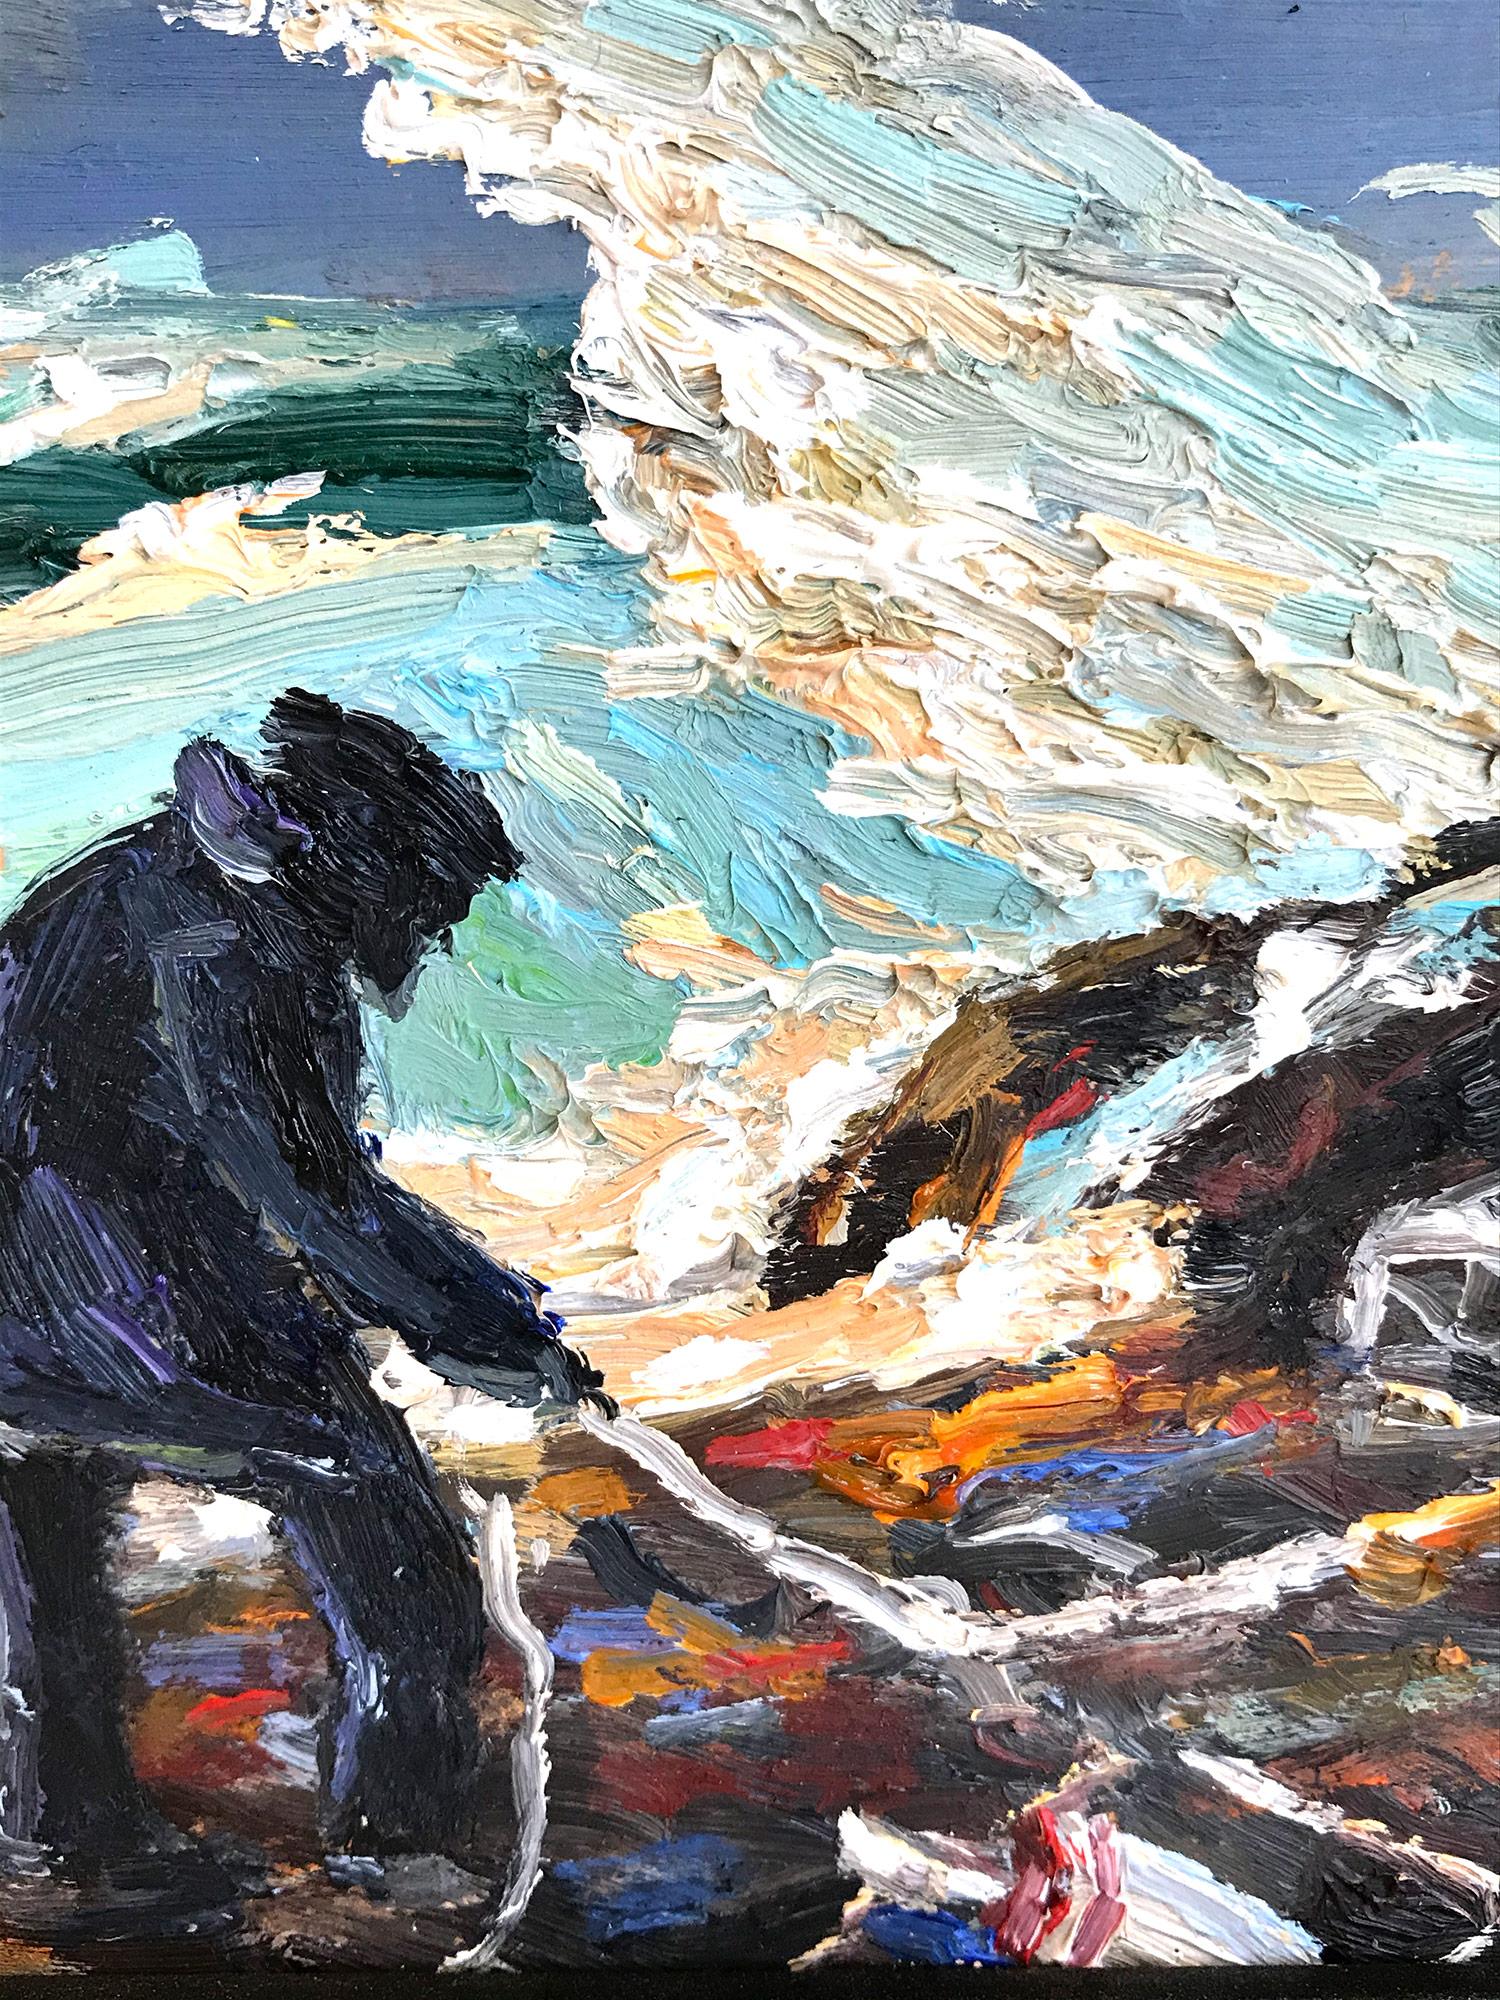 Impressionist seashore landscape with figure of fisherman, lobster pots, and crashing waves in Gloucester Massachusetts. Willet has portrayed this piece in a most dramatic and energetic way and has packed much feeling into this miniature work. It is